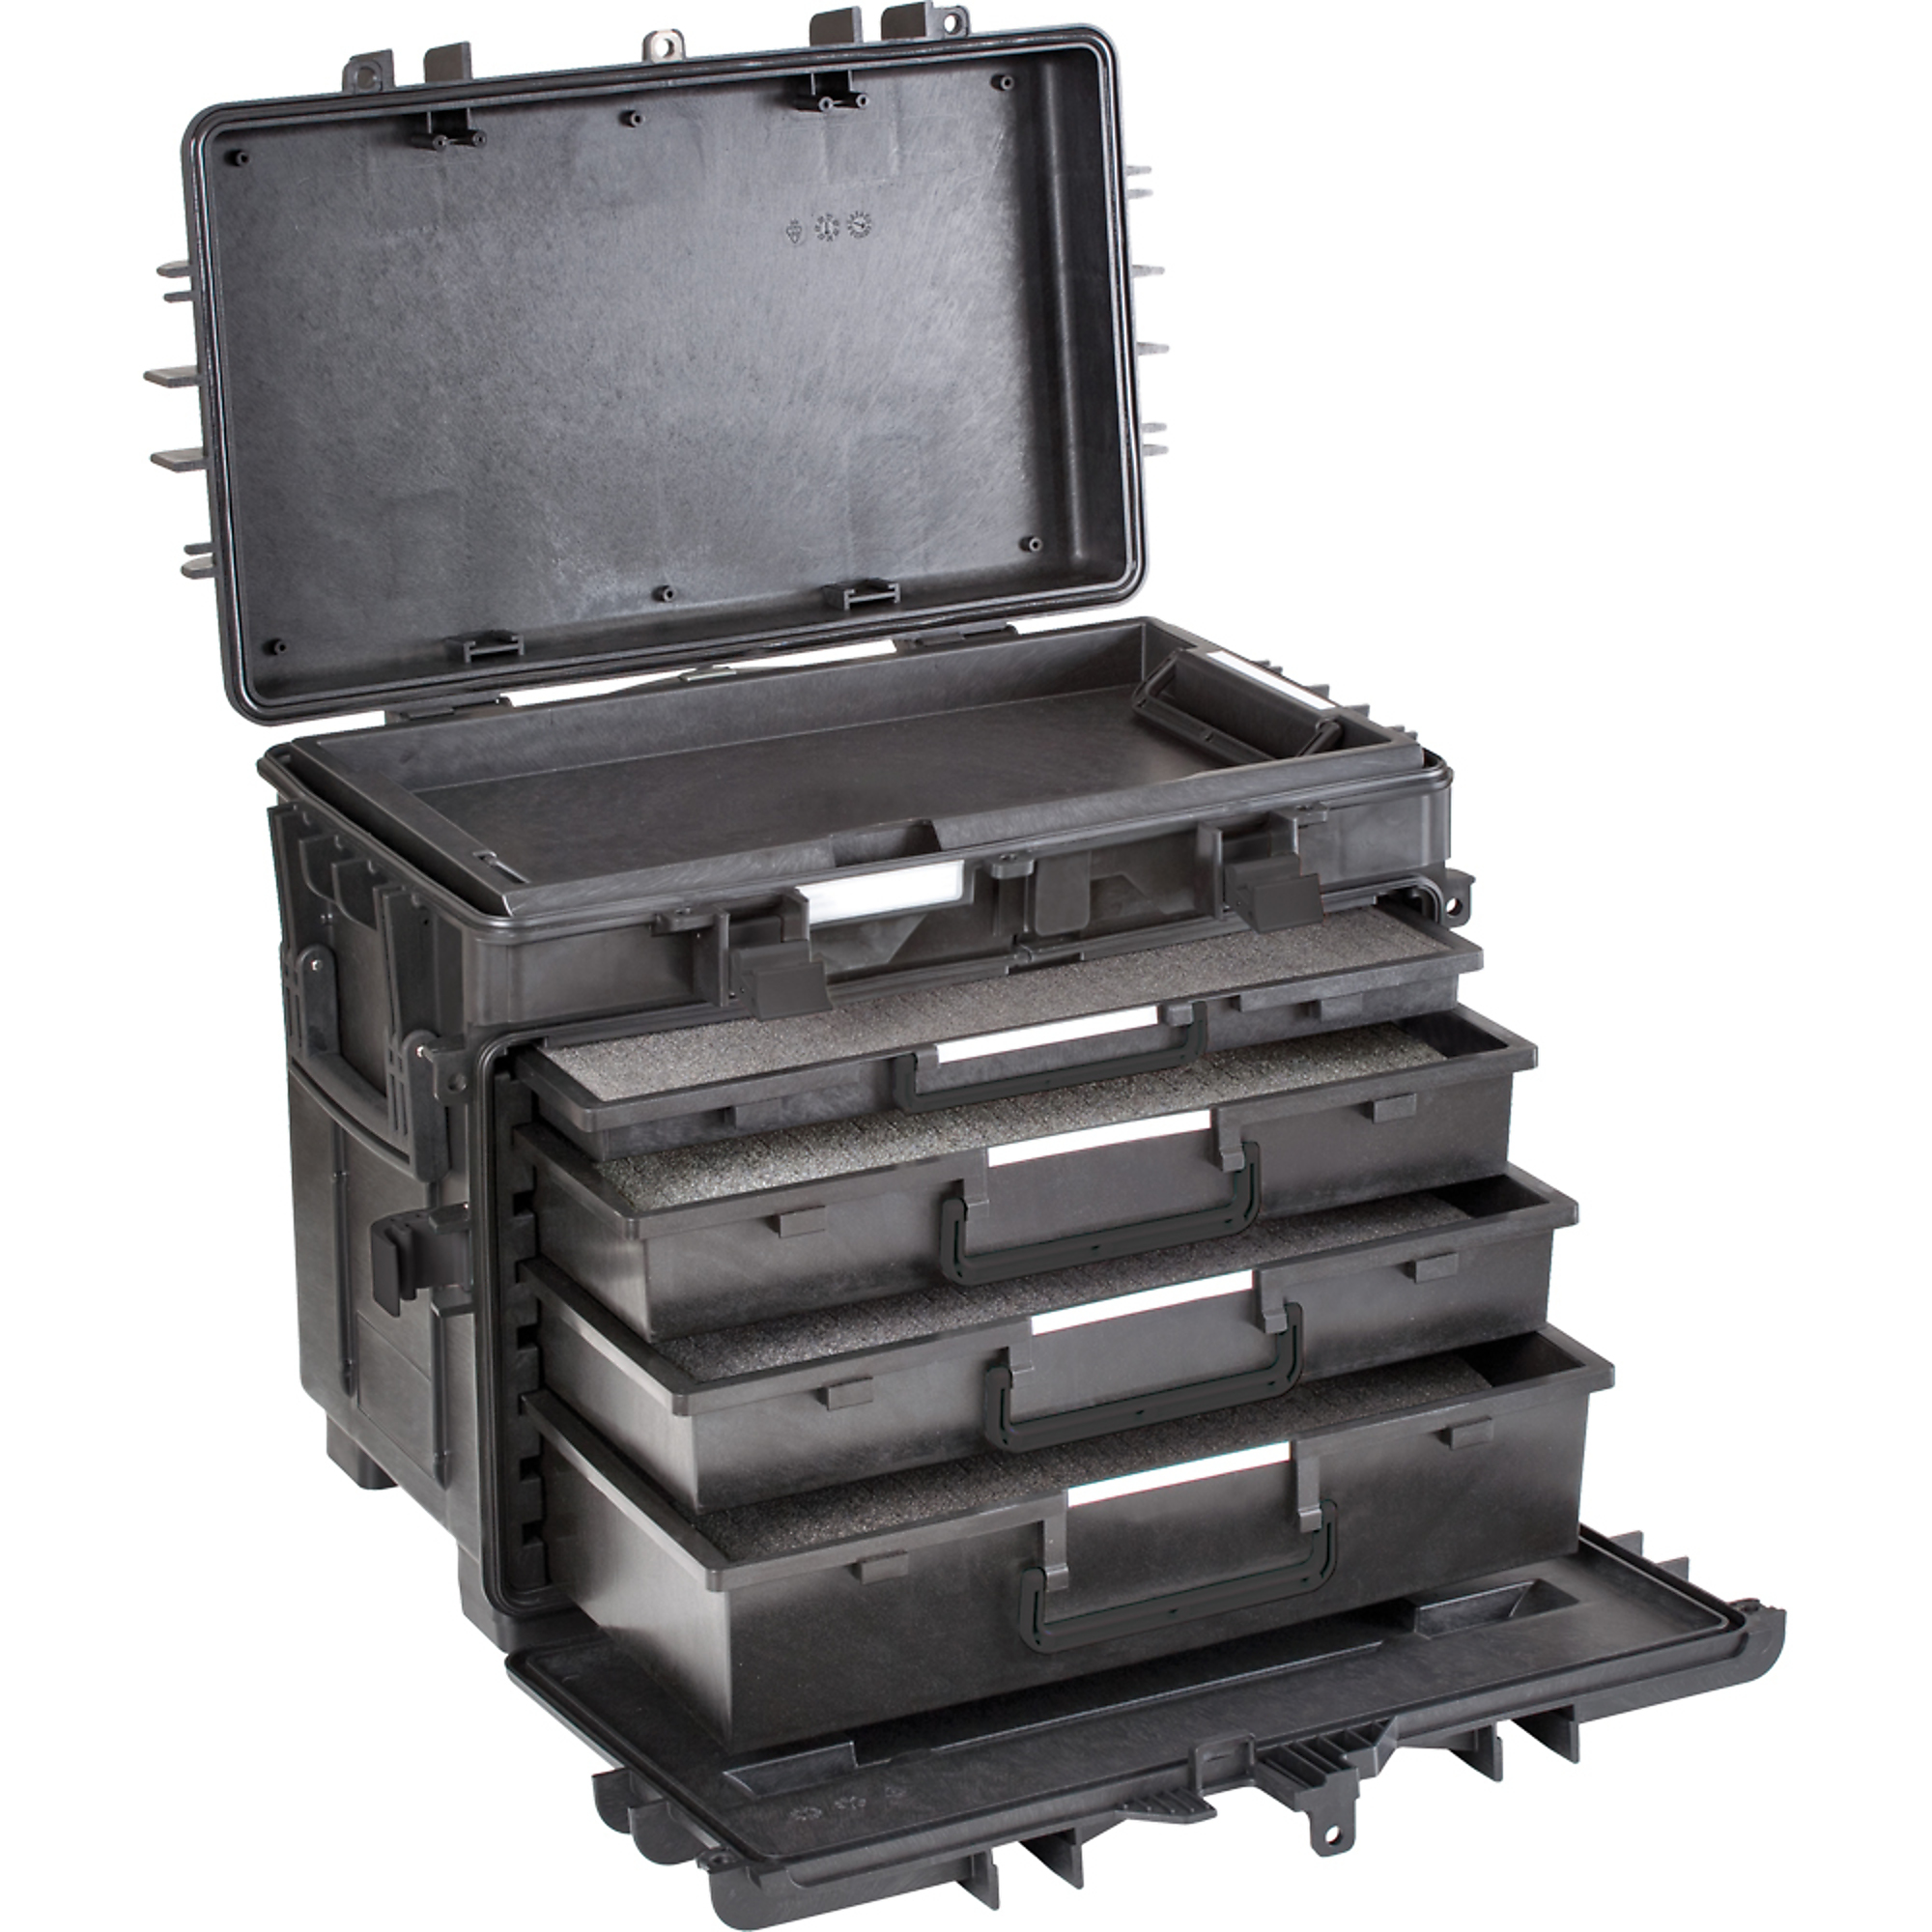 Mobile Tool Chest With Drawers - Military Version – Gray Tools Online Store